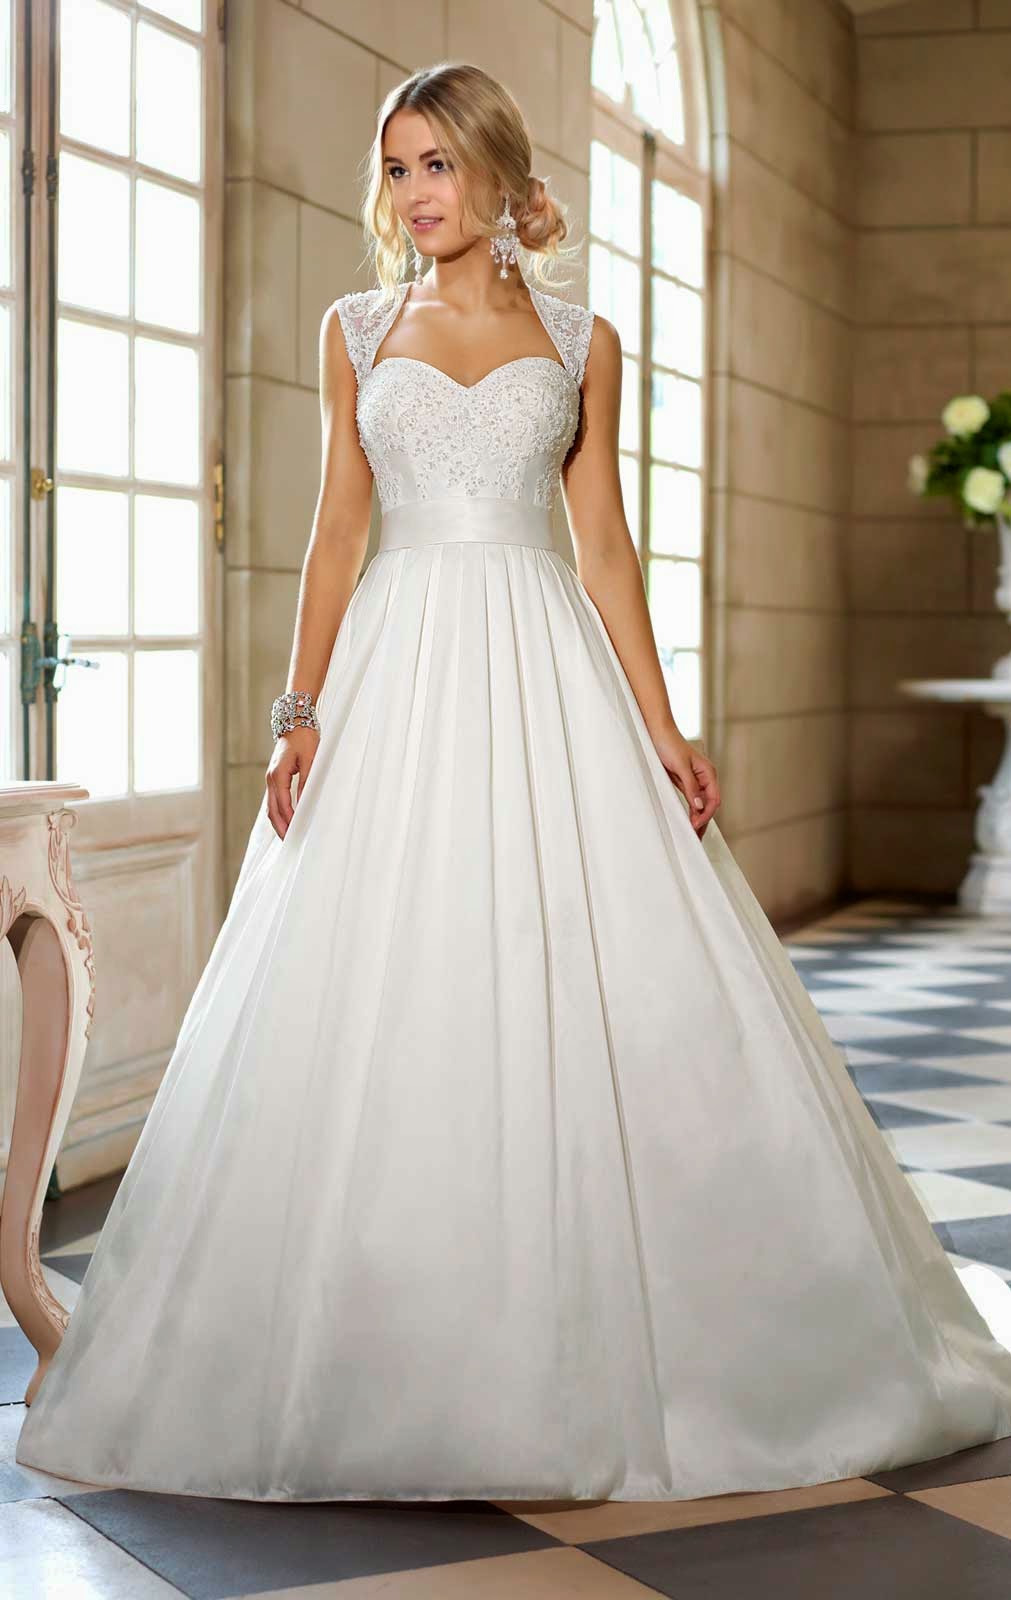 White Wedding Dresses with Bling Ideas